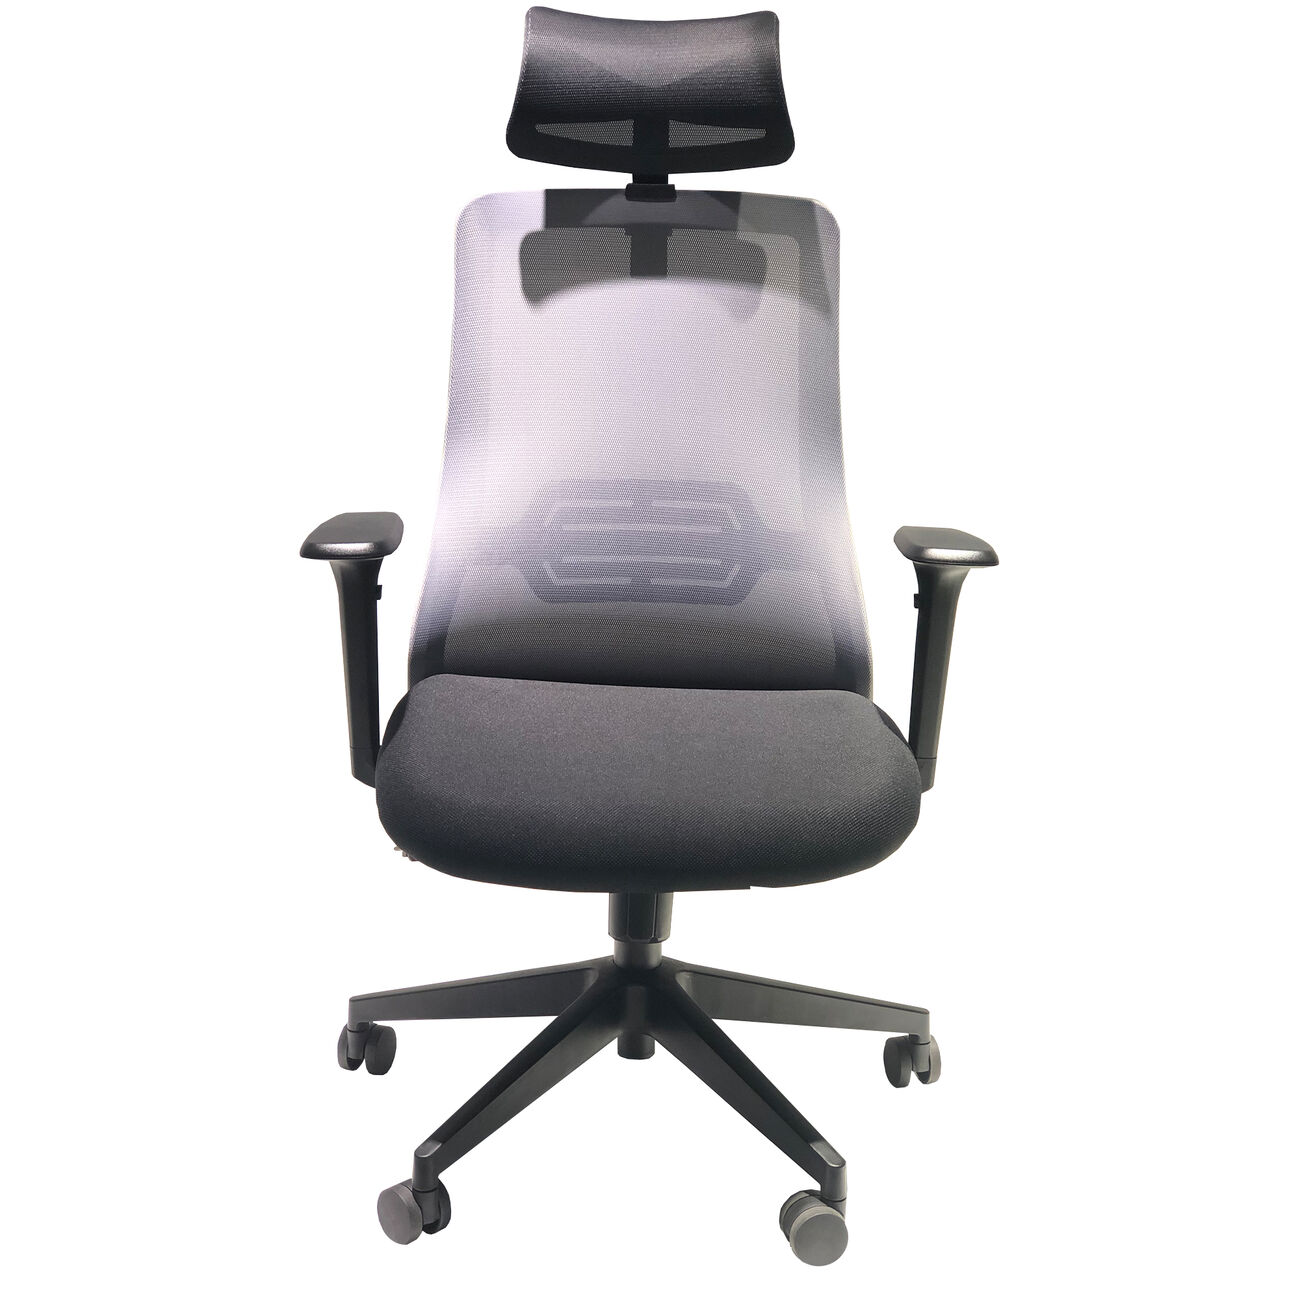 Adjustable Headrest Ergonomic Swivel Office Chair with Padded Seat and Casters, Black and Gray